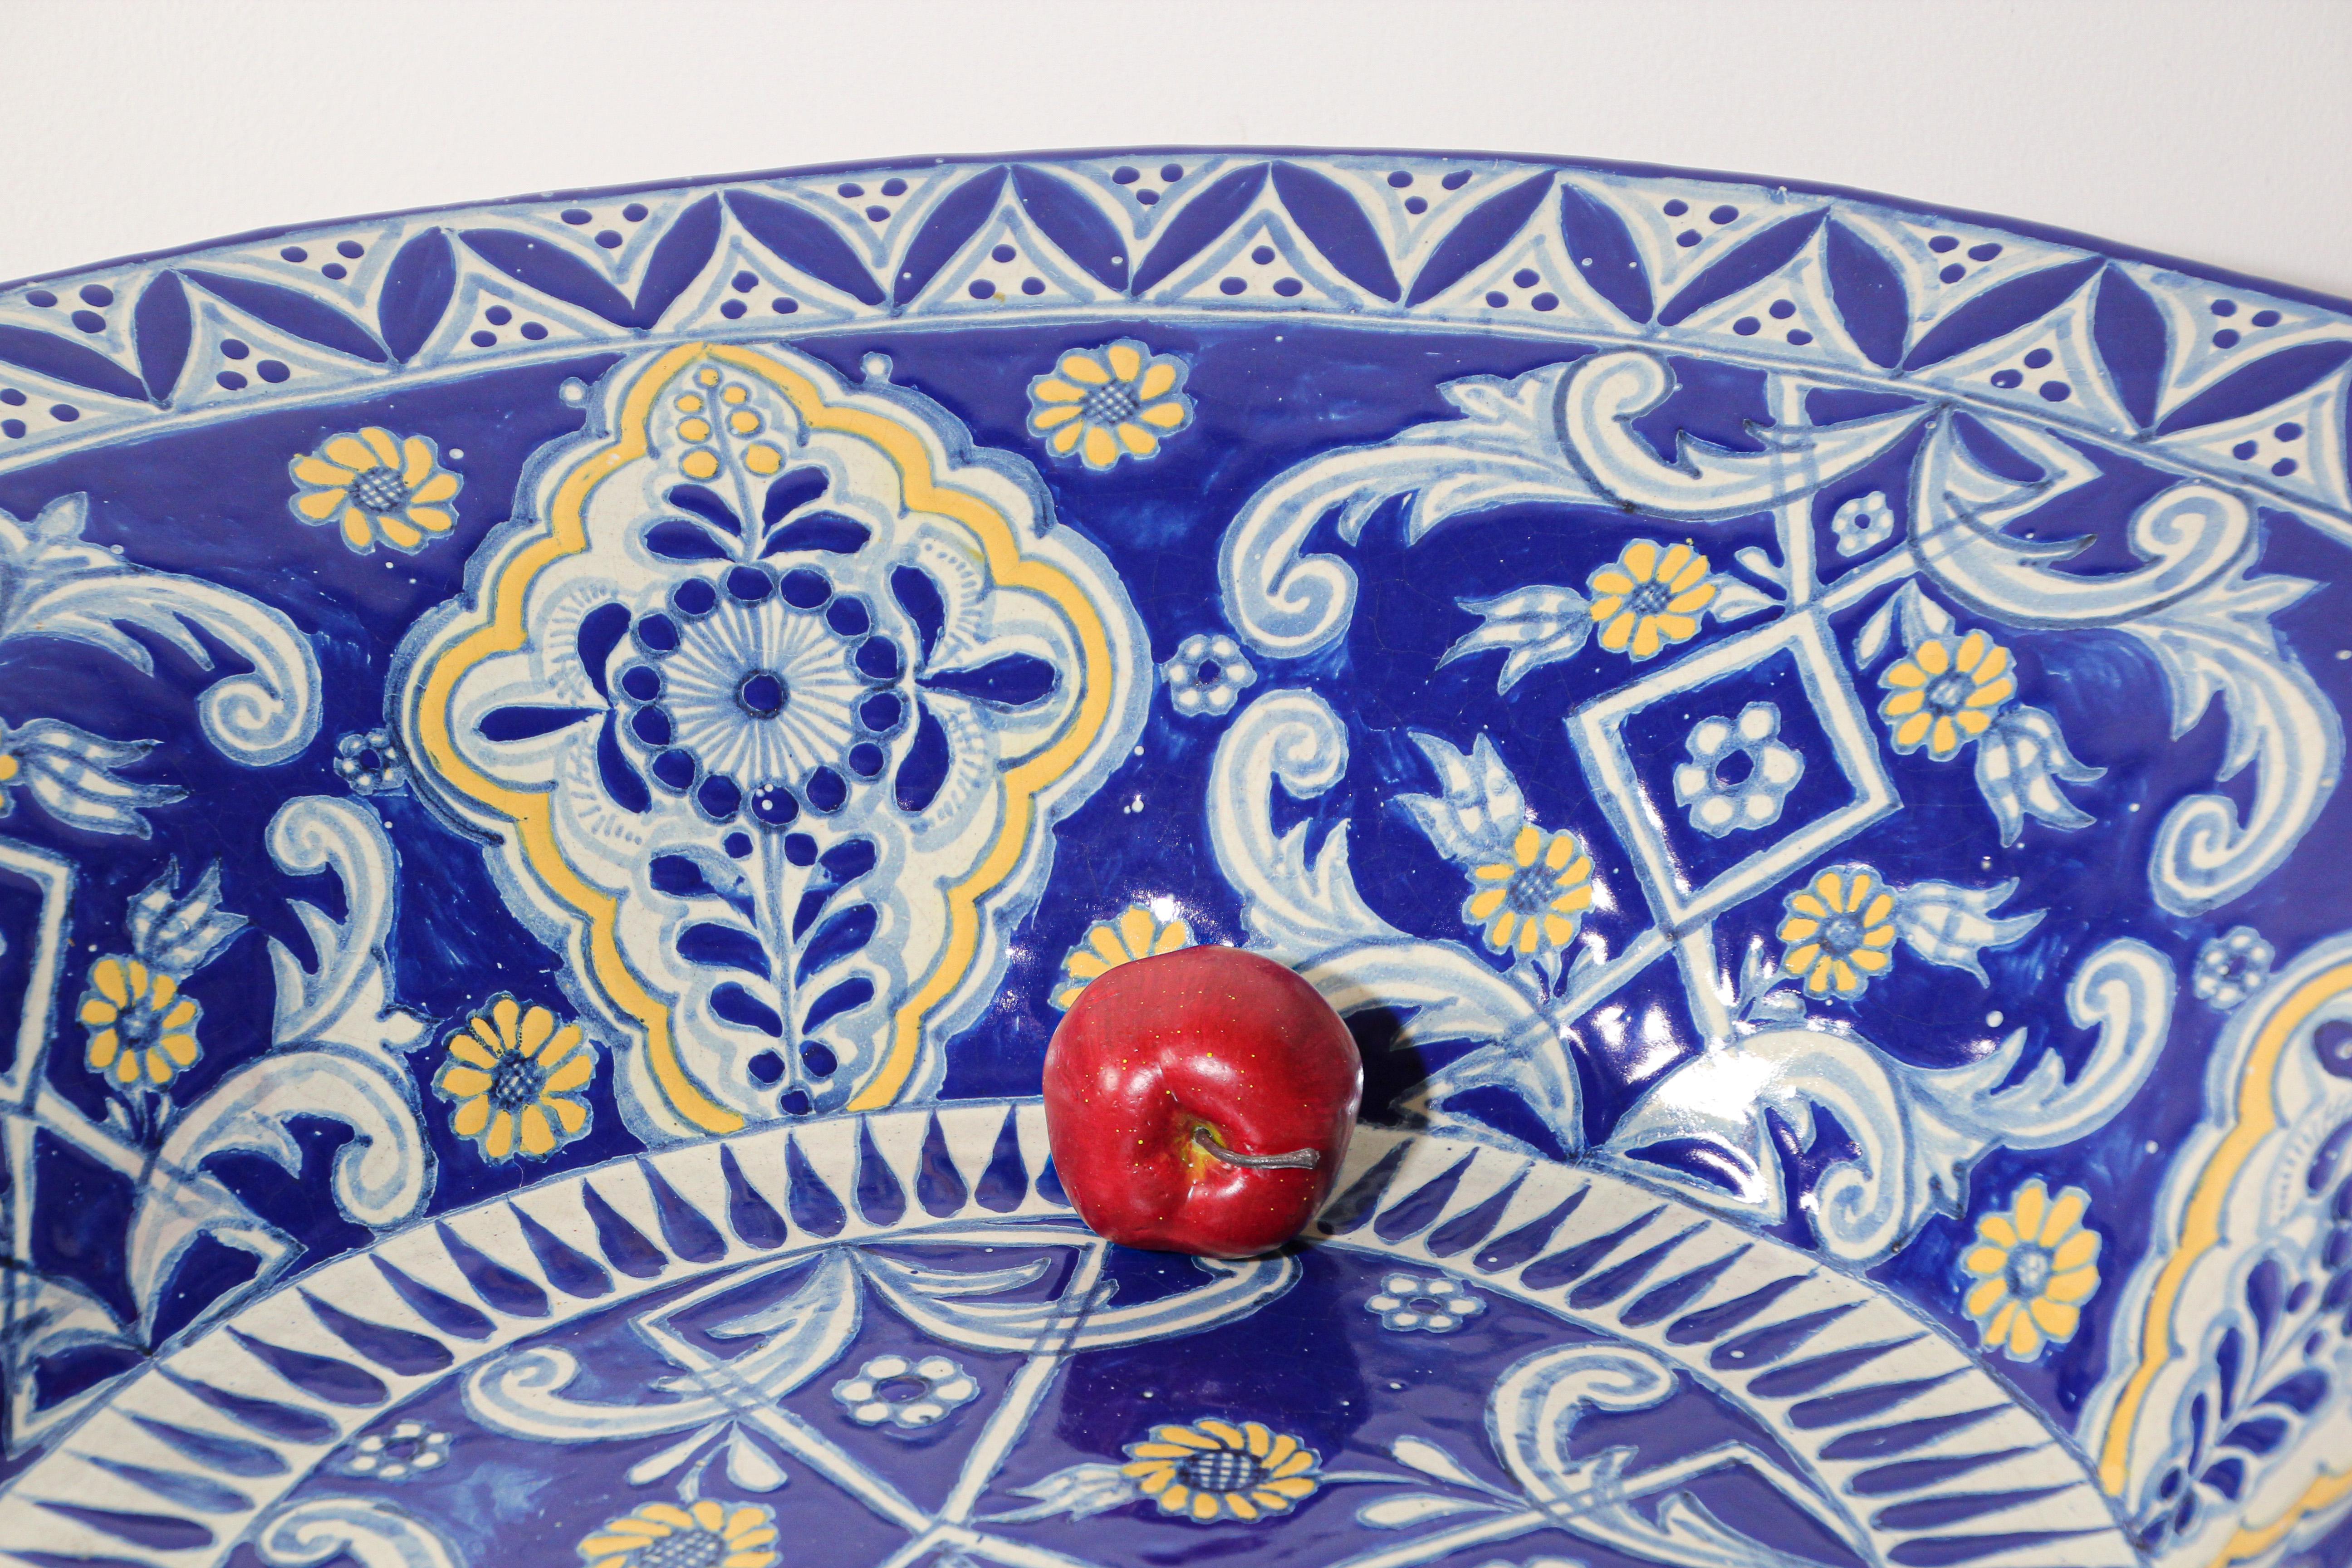 Oversized Blue and White Mexican Talavera Glazed Ceramic Bowl In Good Condition For Sale In North Hollywood, CA